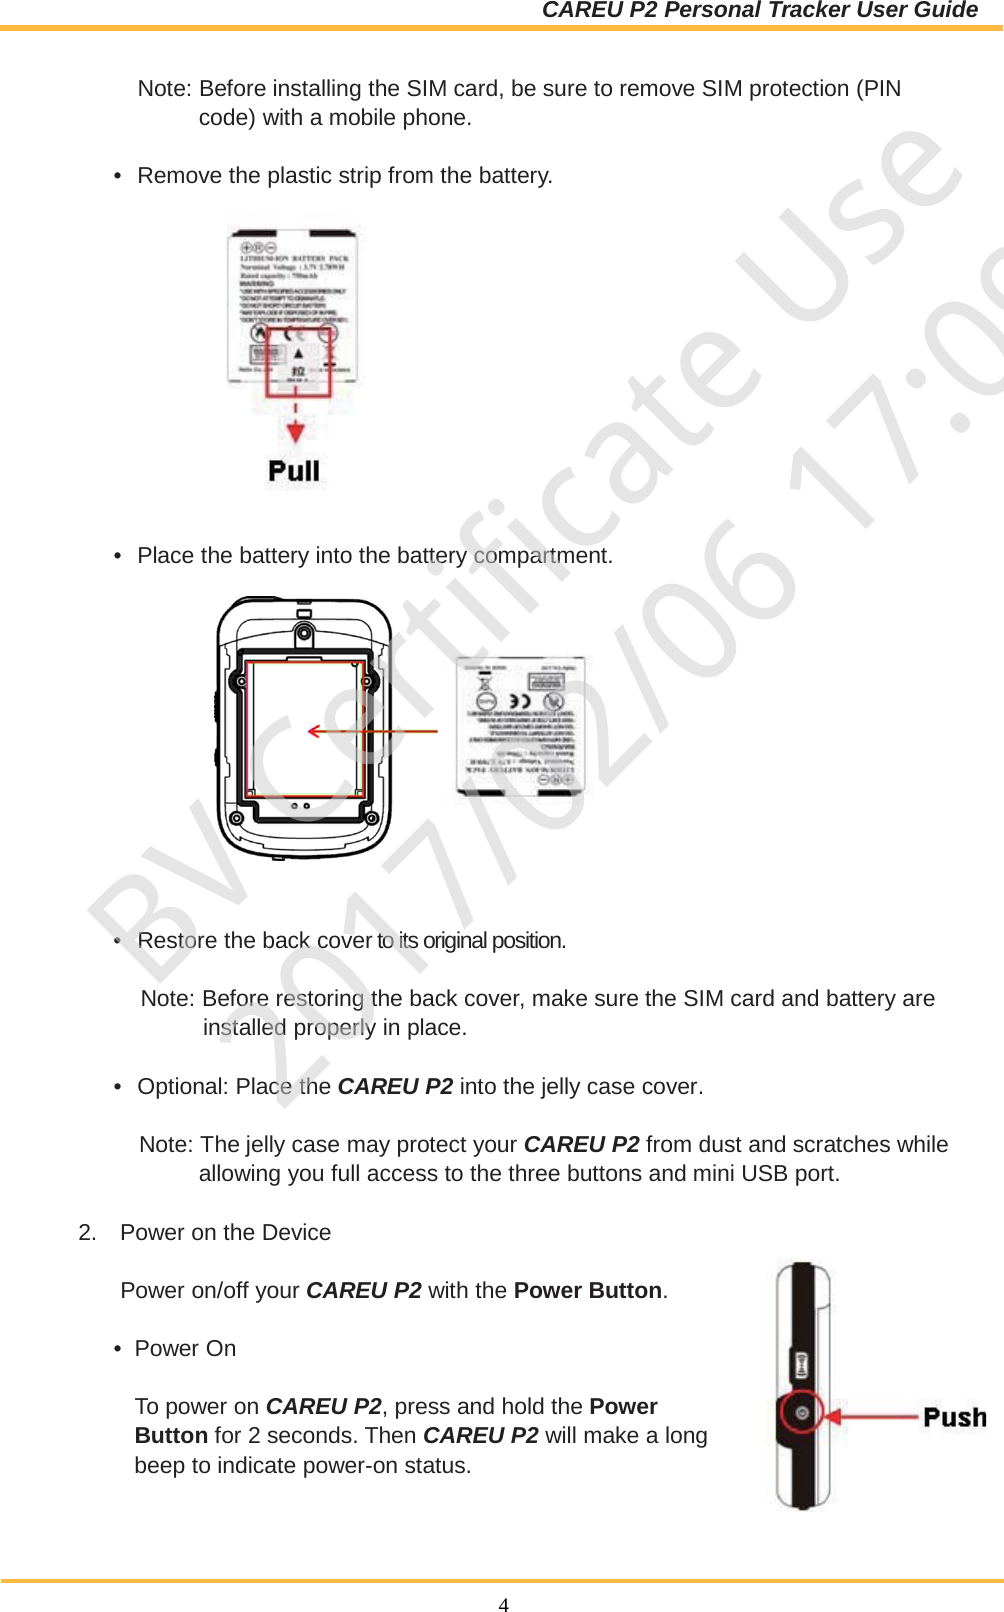 CAREU P2 Personal Tracker User Guide  4   Note: Before installing the SIM card, be sure to remove SIM protection (PIN code) with a mobile phone.  •  Remove the plastic strip from the battery.     •  Place the battery into the battery compartment.         •  Restore the back cover to its original position.   Note: Before restoring the back cover, make sure the SIM card and battery are installed properly in place.  •  Optional: Place the CAREU P2 into the jelly case cover.   Note: The jelly case may protect your CAREU P2 from dust and scratches while allowing you full access to the three buttons and mini USB port.  2. Power on the Device   Power on/off your CAREU P2 with the Power Button.   •  Power On   To power on CAREU P2, press and hold the Power Button for 2 seconds. Then CAREU P2 will make a long beep to indicate power-on status. BV Certificate Use2017/02/06 17:09